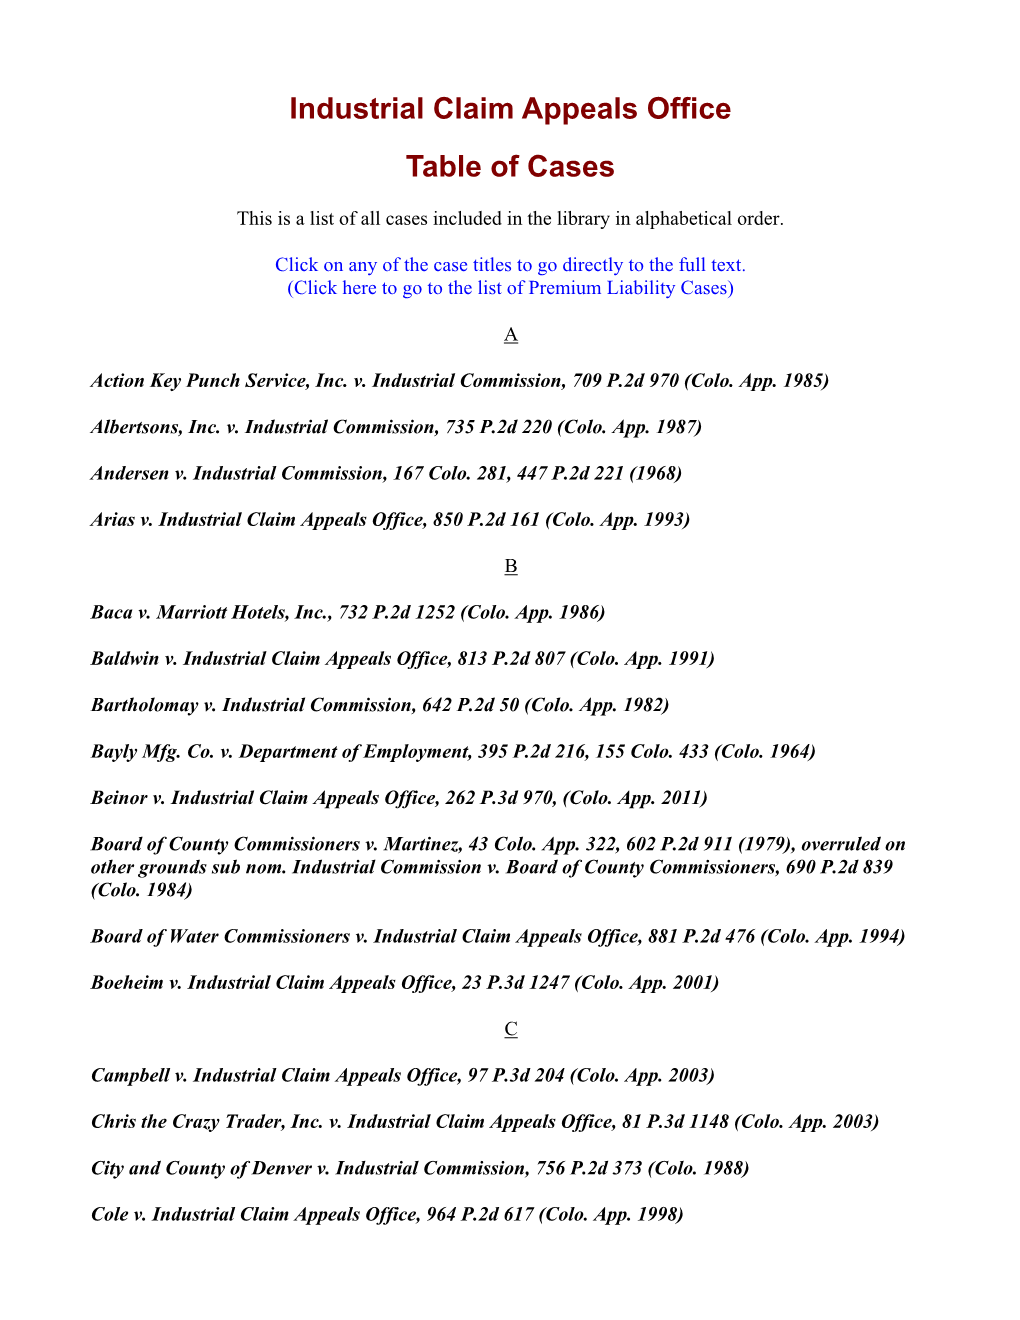 Industrial Claim Appeals Office Table of Cases